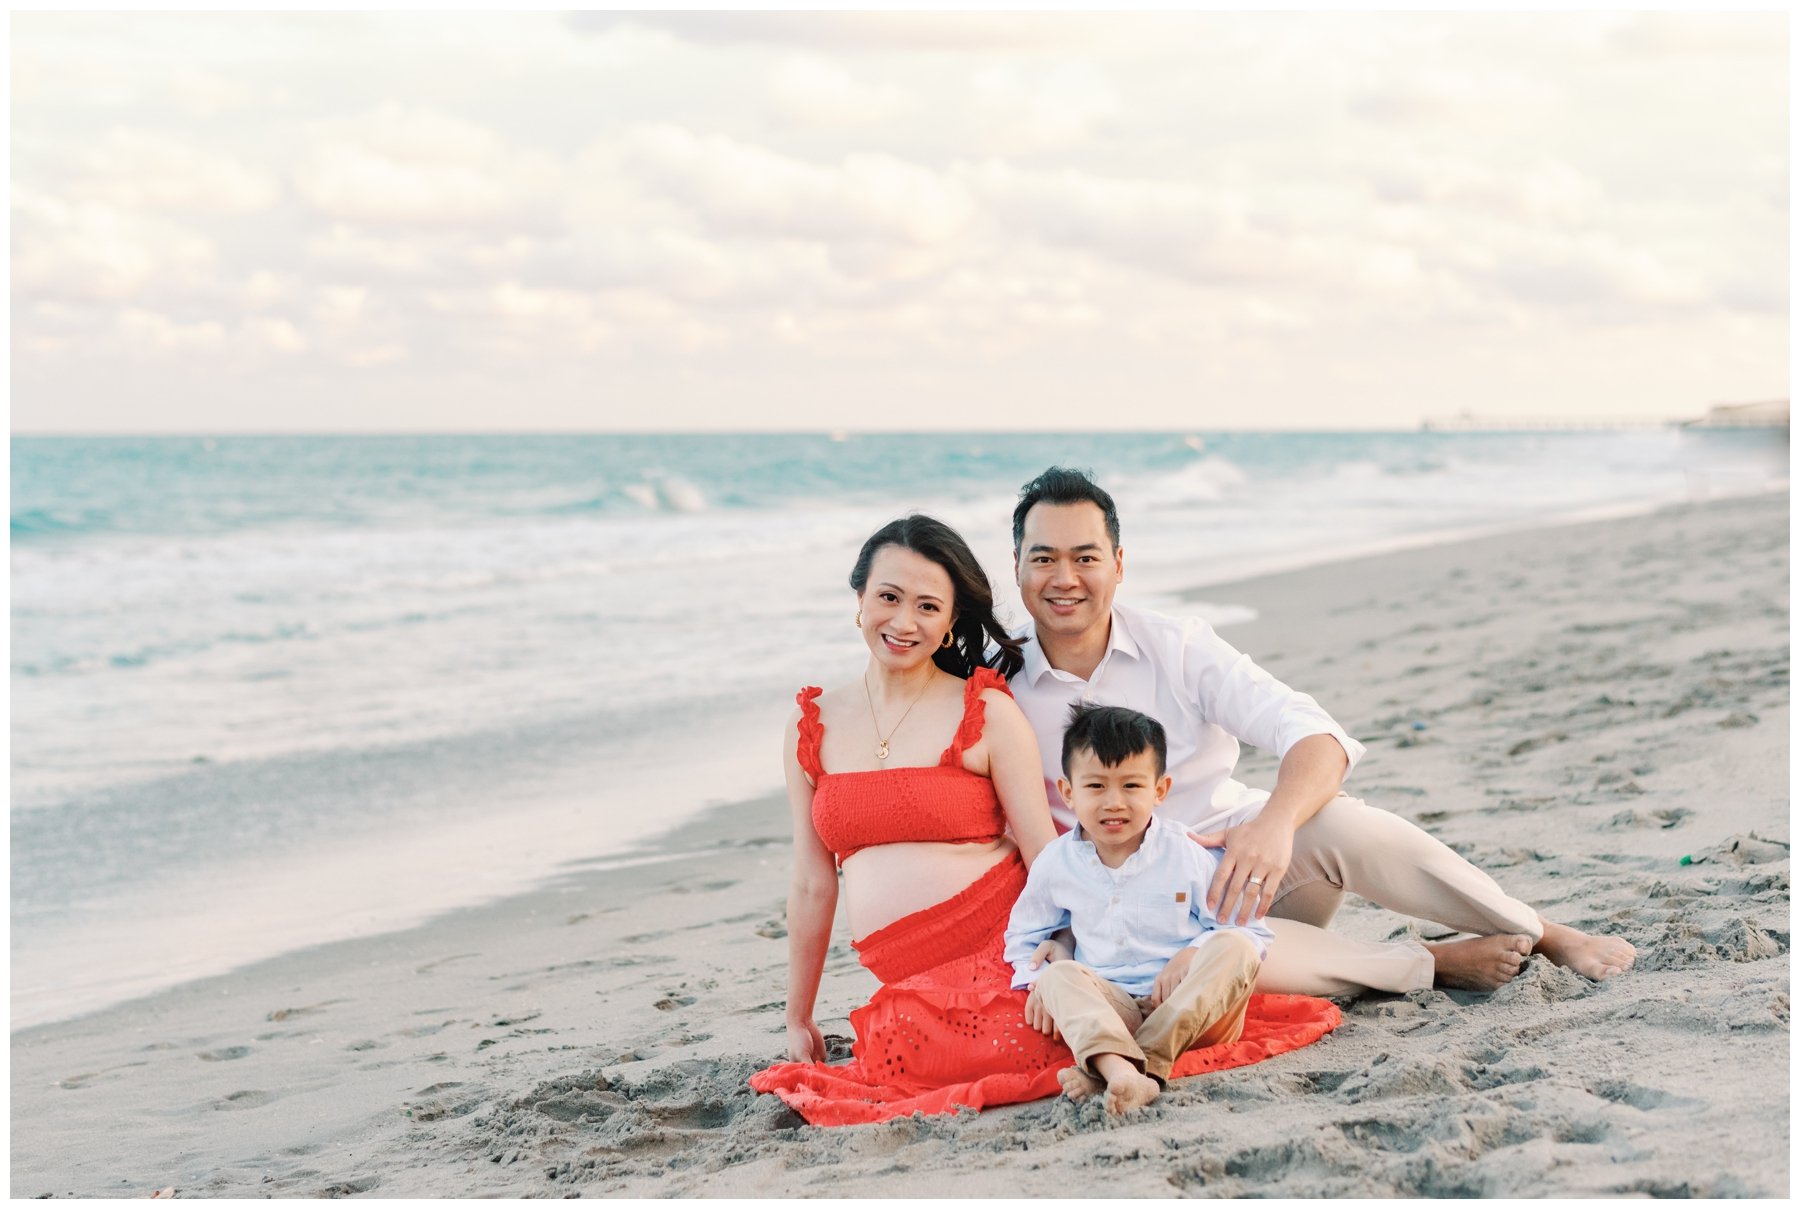 Woman wearing red top and skirt sitting next to husband and son on the beach during maternity photos